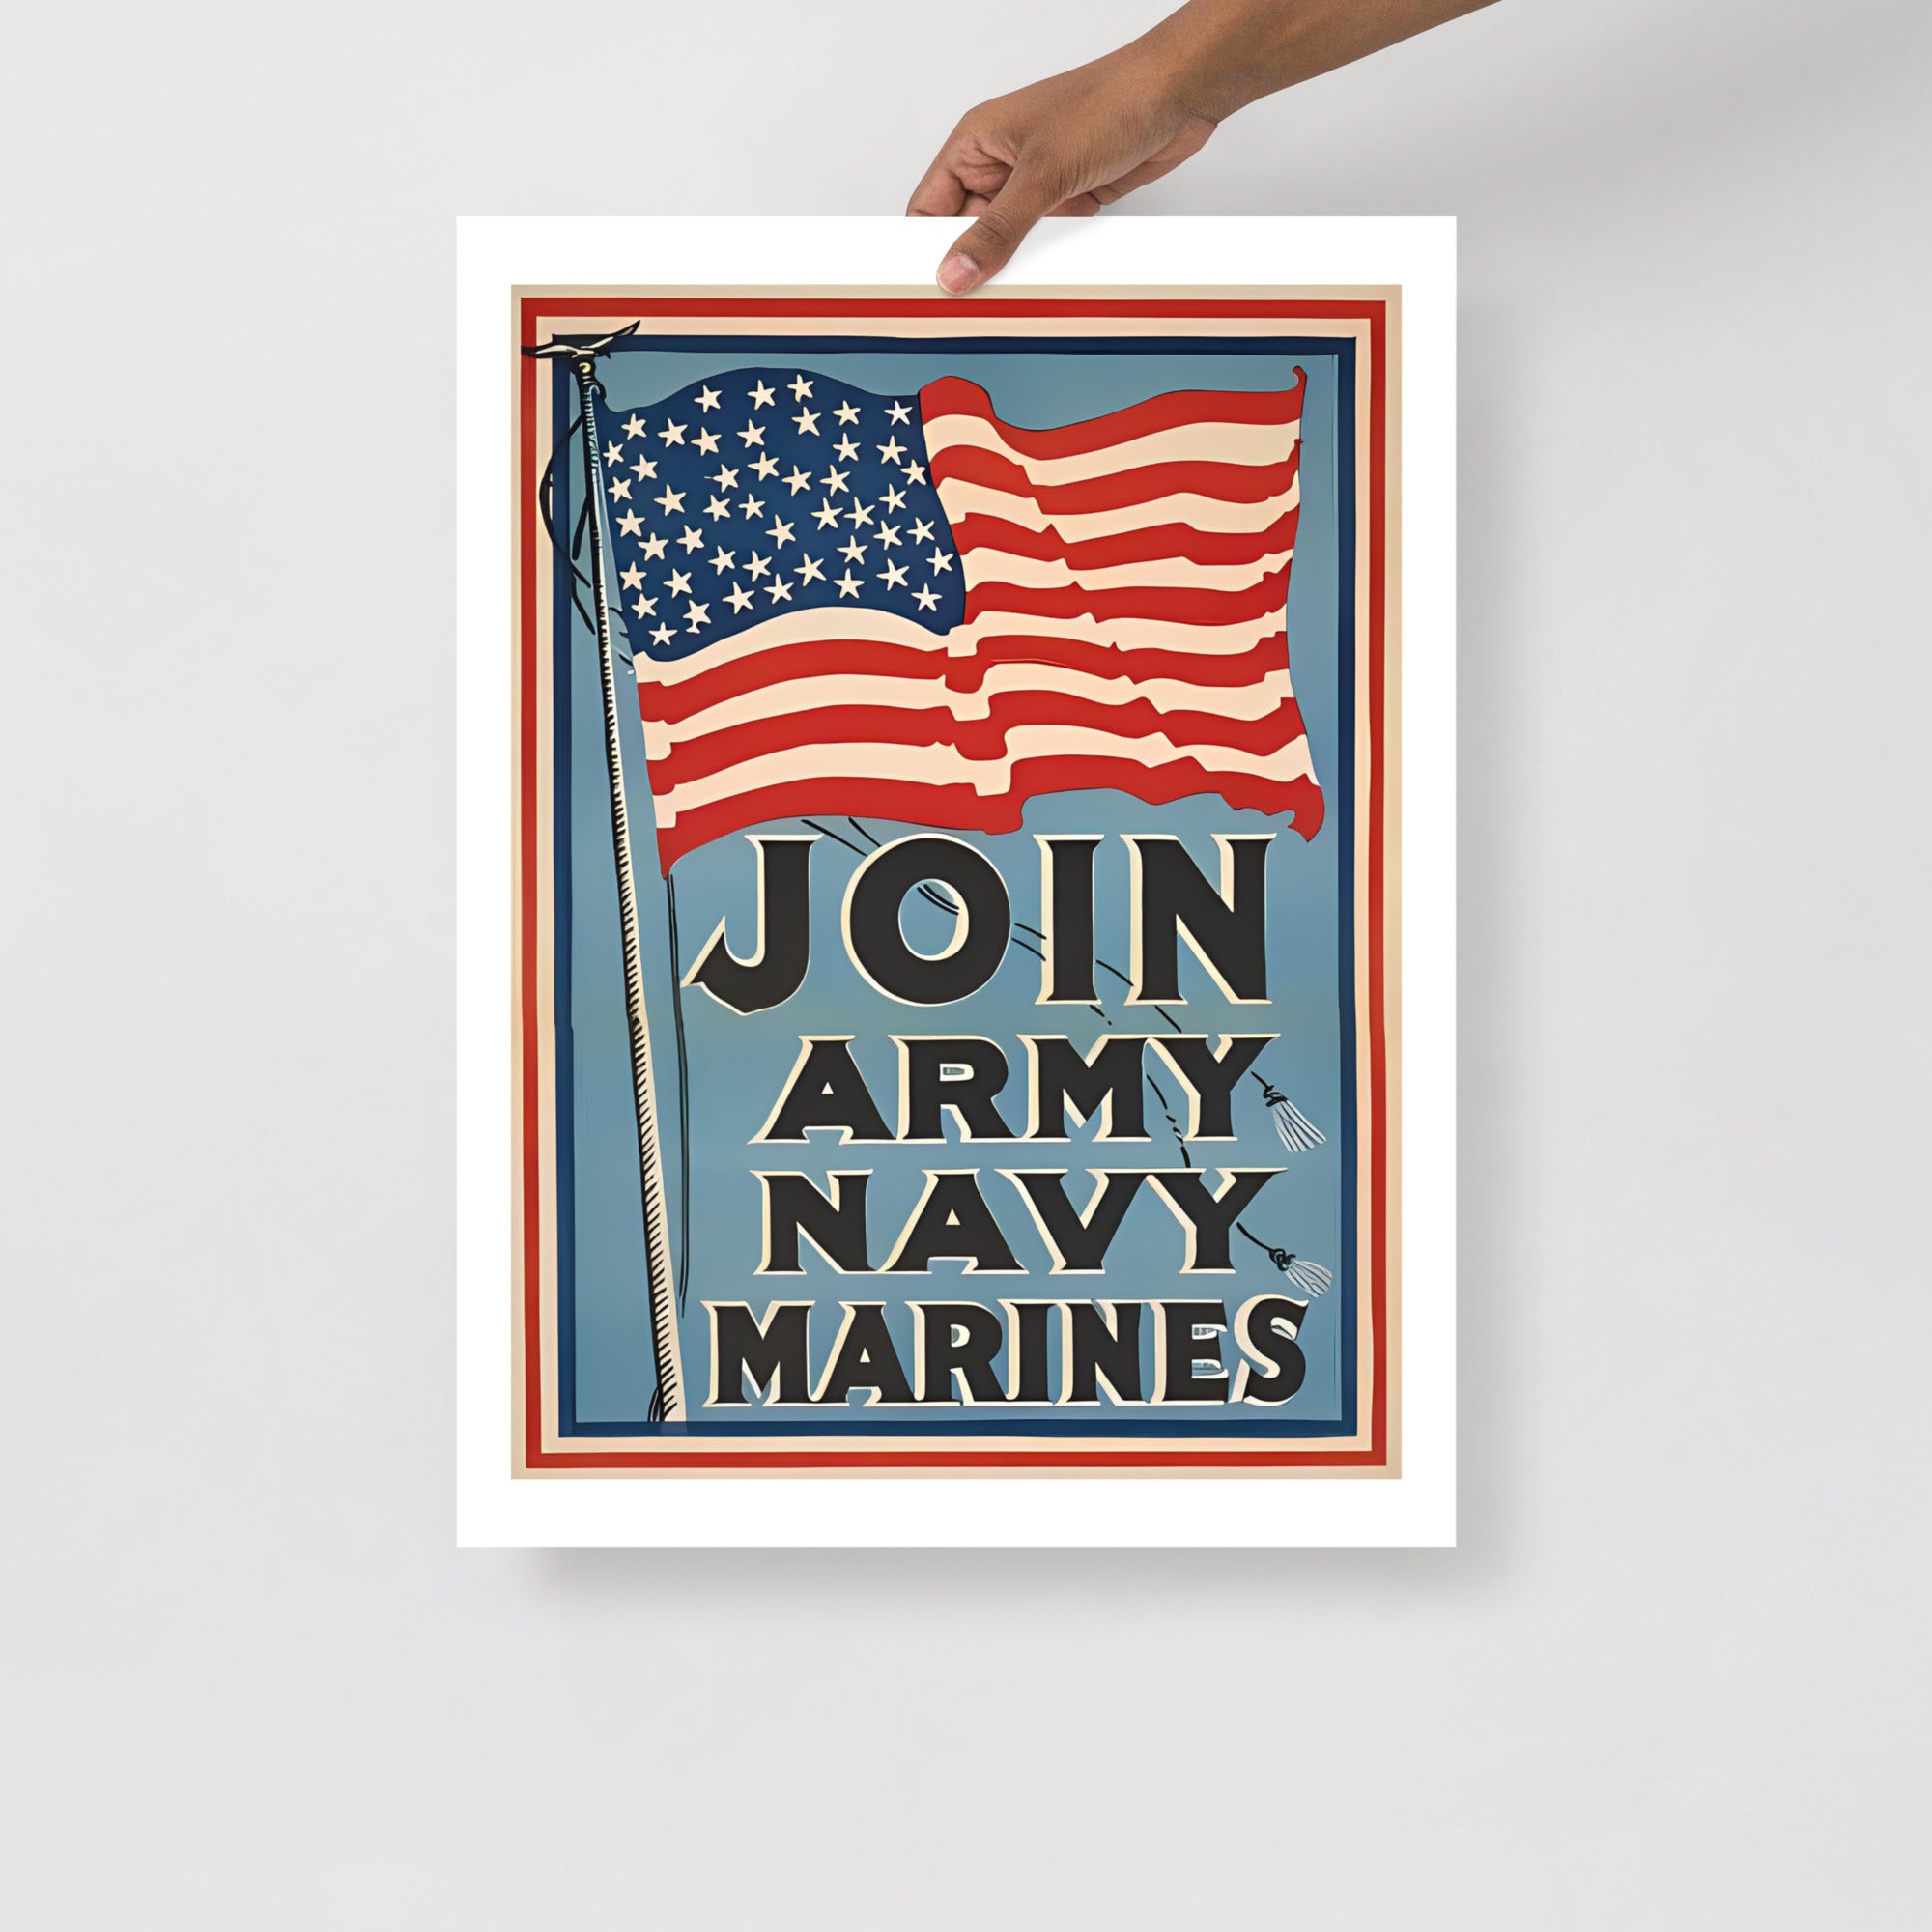 Join Army, Navy, Marines USA vintage military poster (inches)